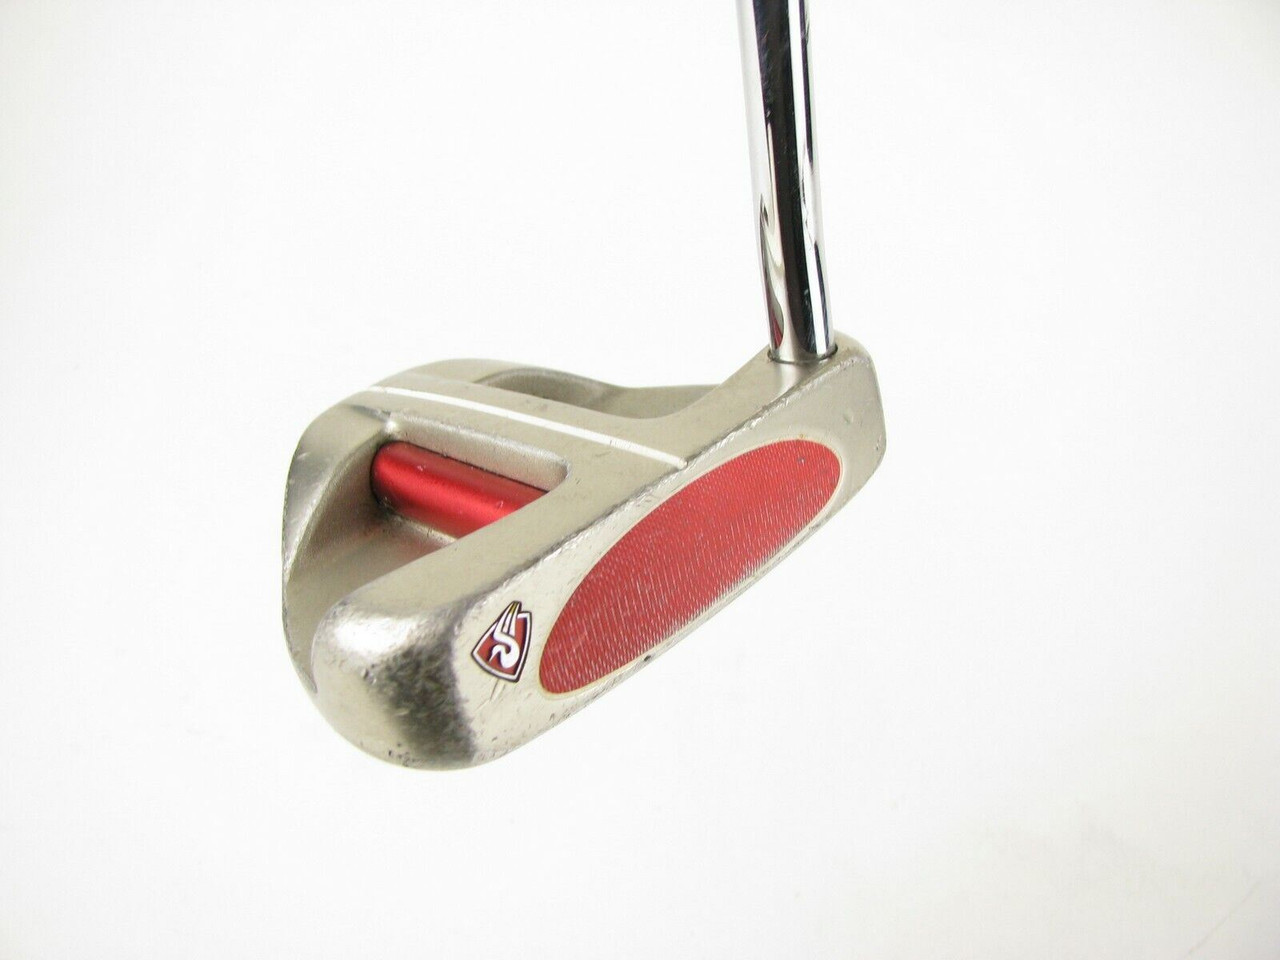 TaylorMade Rossa Mezza Monza Putter 32 inches